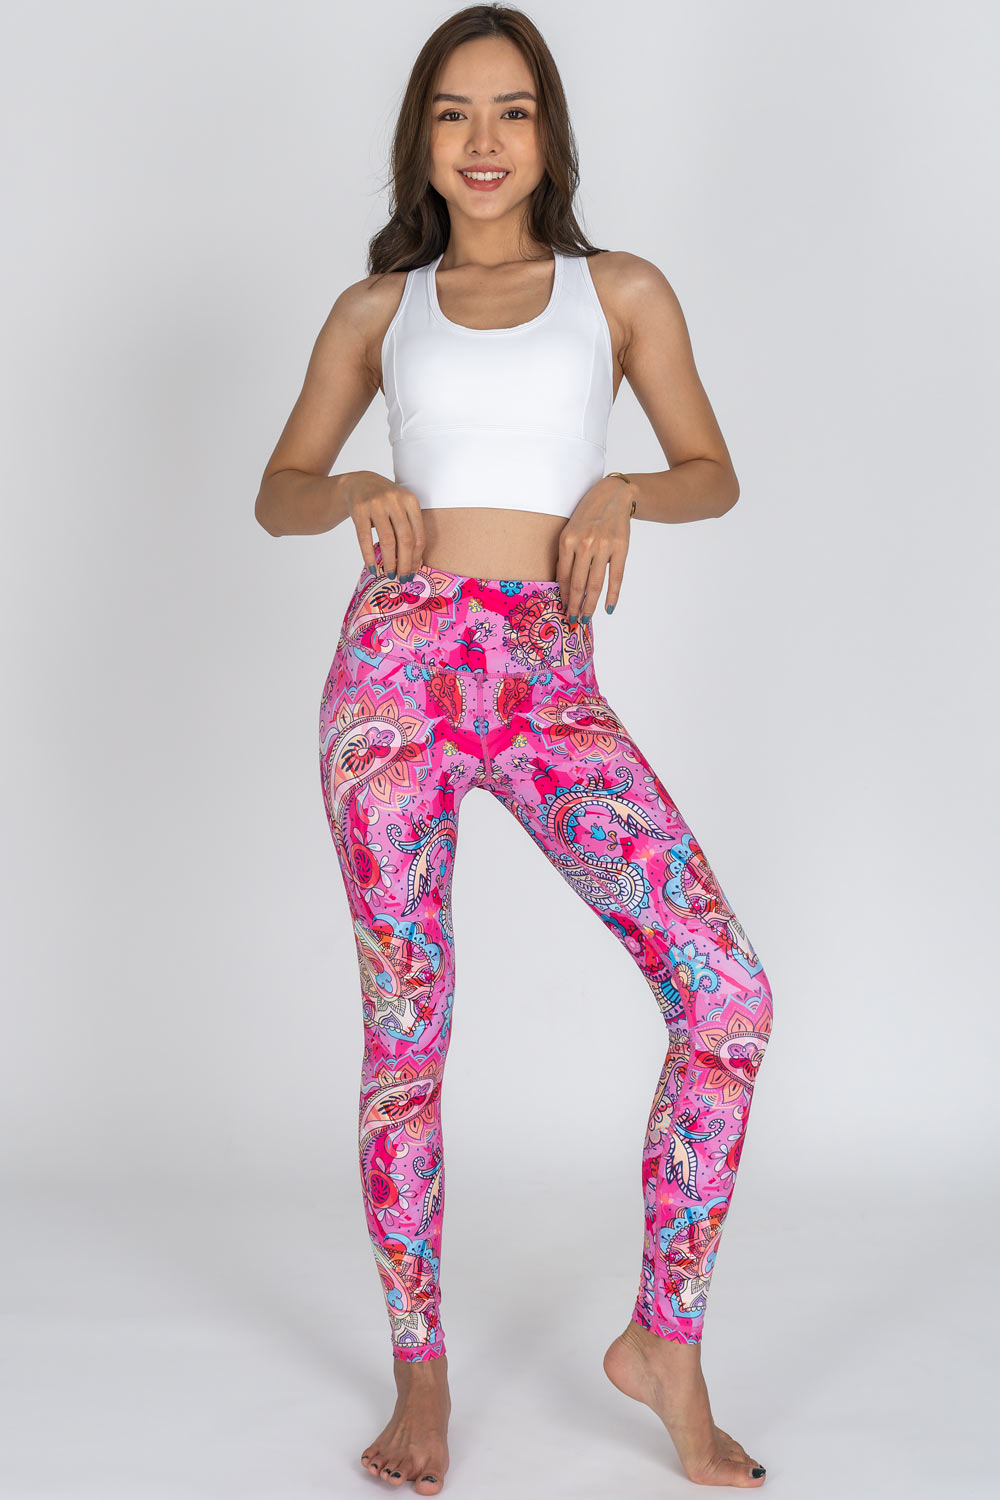 https://chandraactive.com/wp-content/uploads/Leggings-Party-Paisley-front-out.jpg